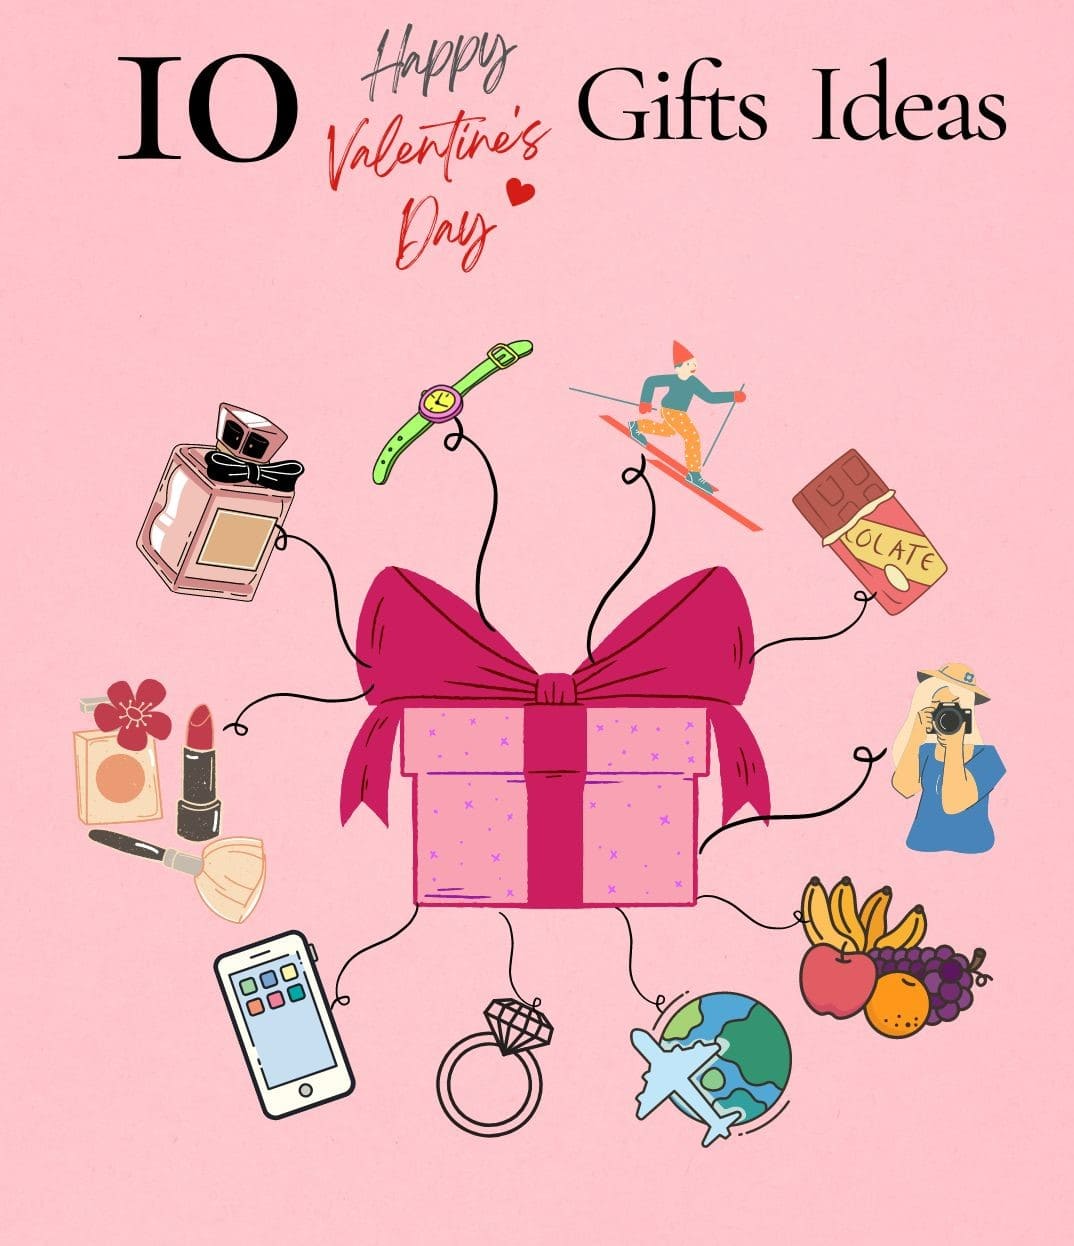 Valentine's day gift ideas for her